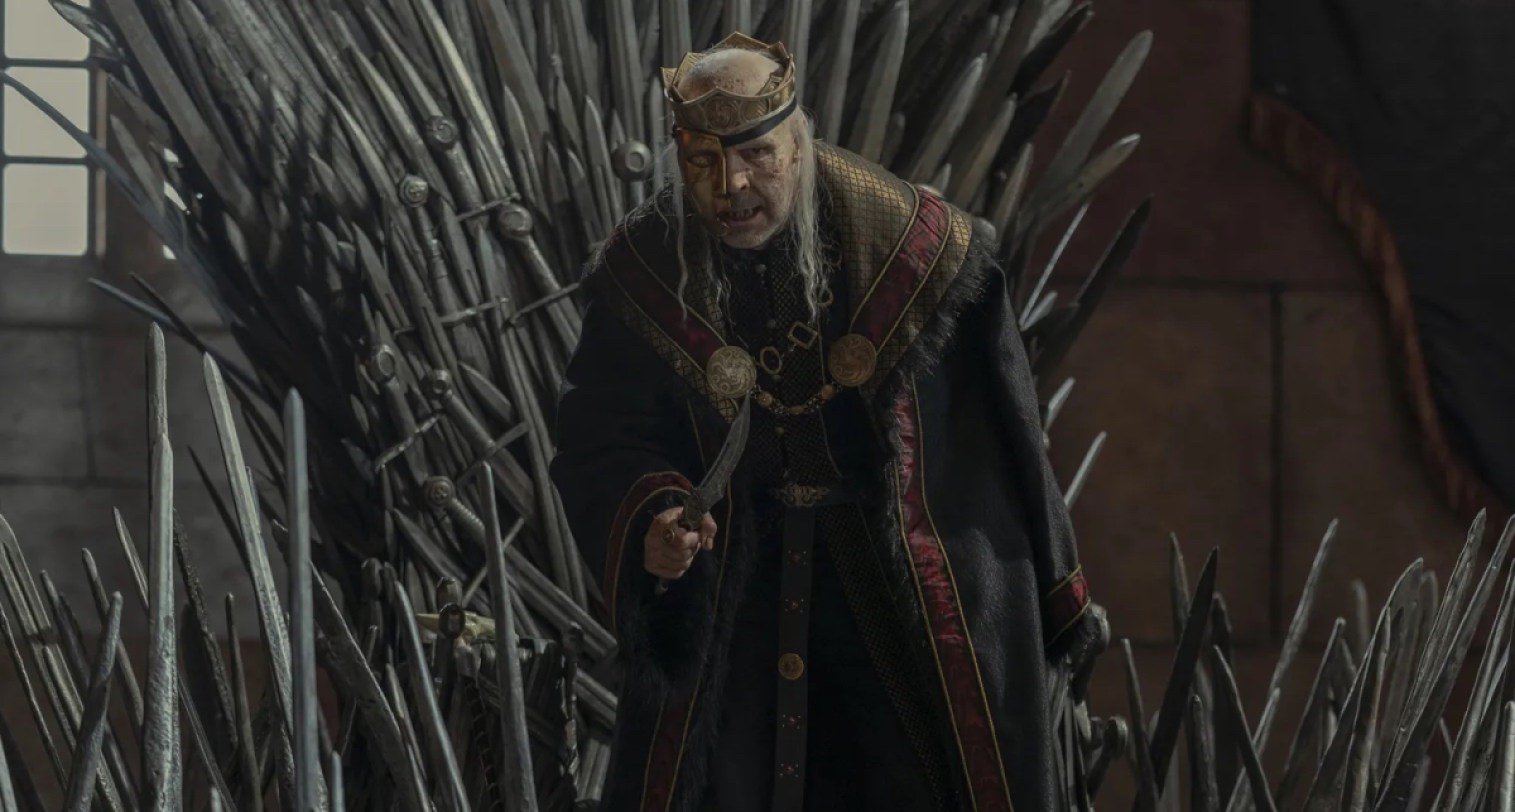 King Viserys I Targaryen , played by Paddy Considine, stands up to defend the honor of his daughter Rhaenyra in the eighth episode of the first season of House of the Dragon